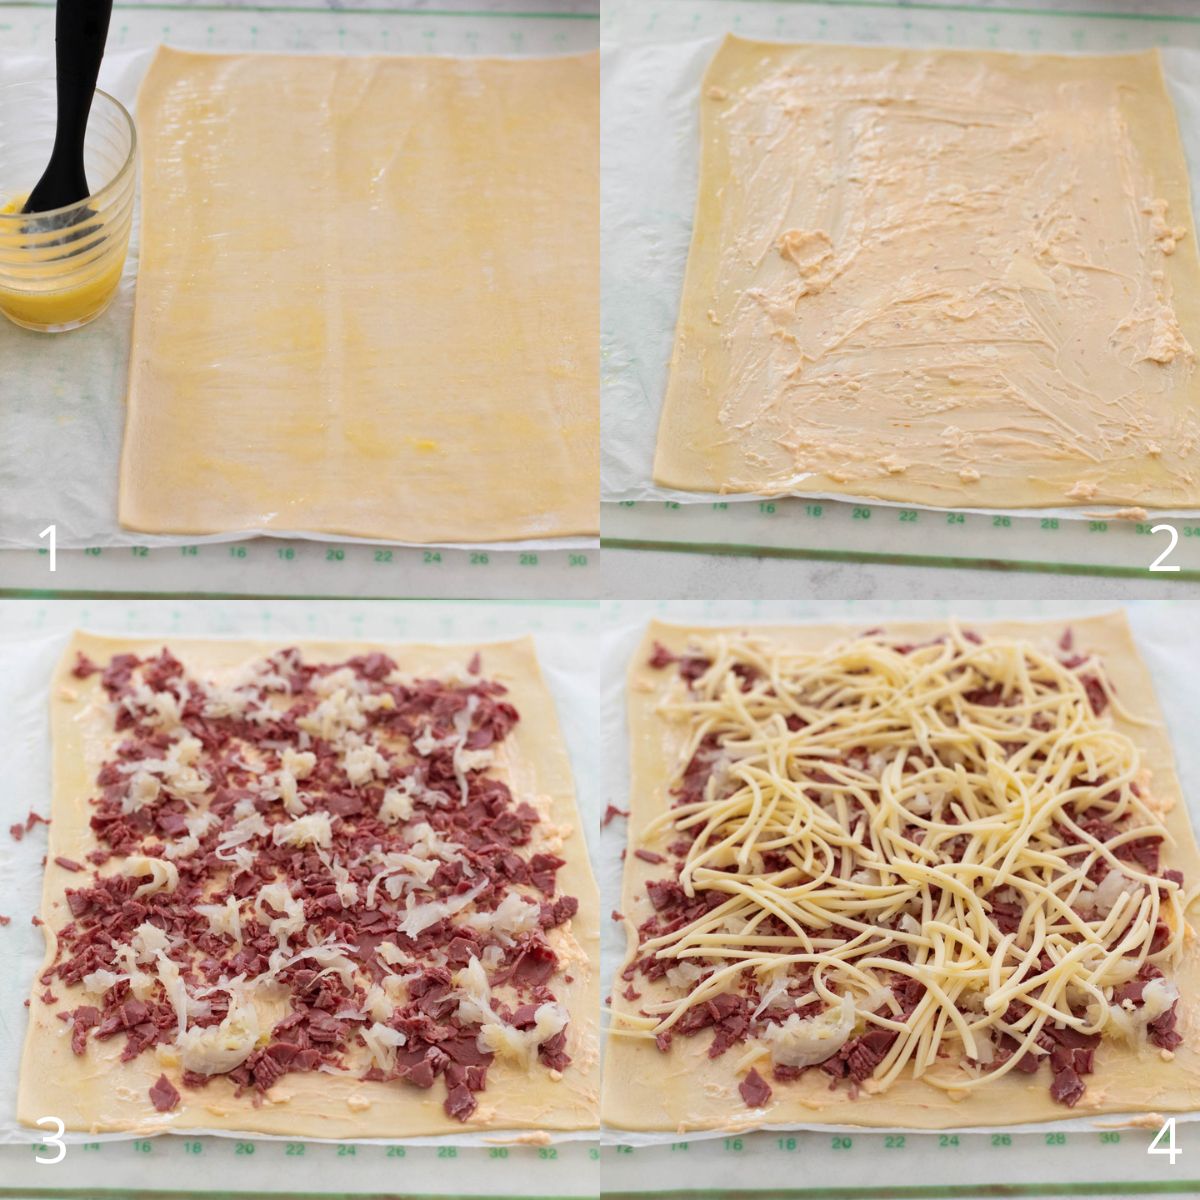 The step by step photos show how to assemble the reuben roll ups.